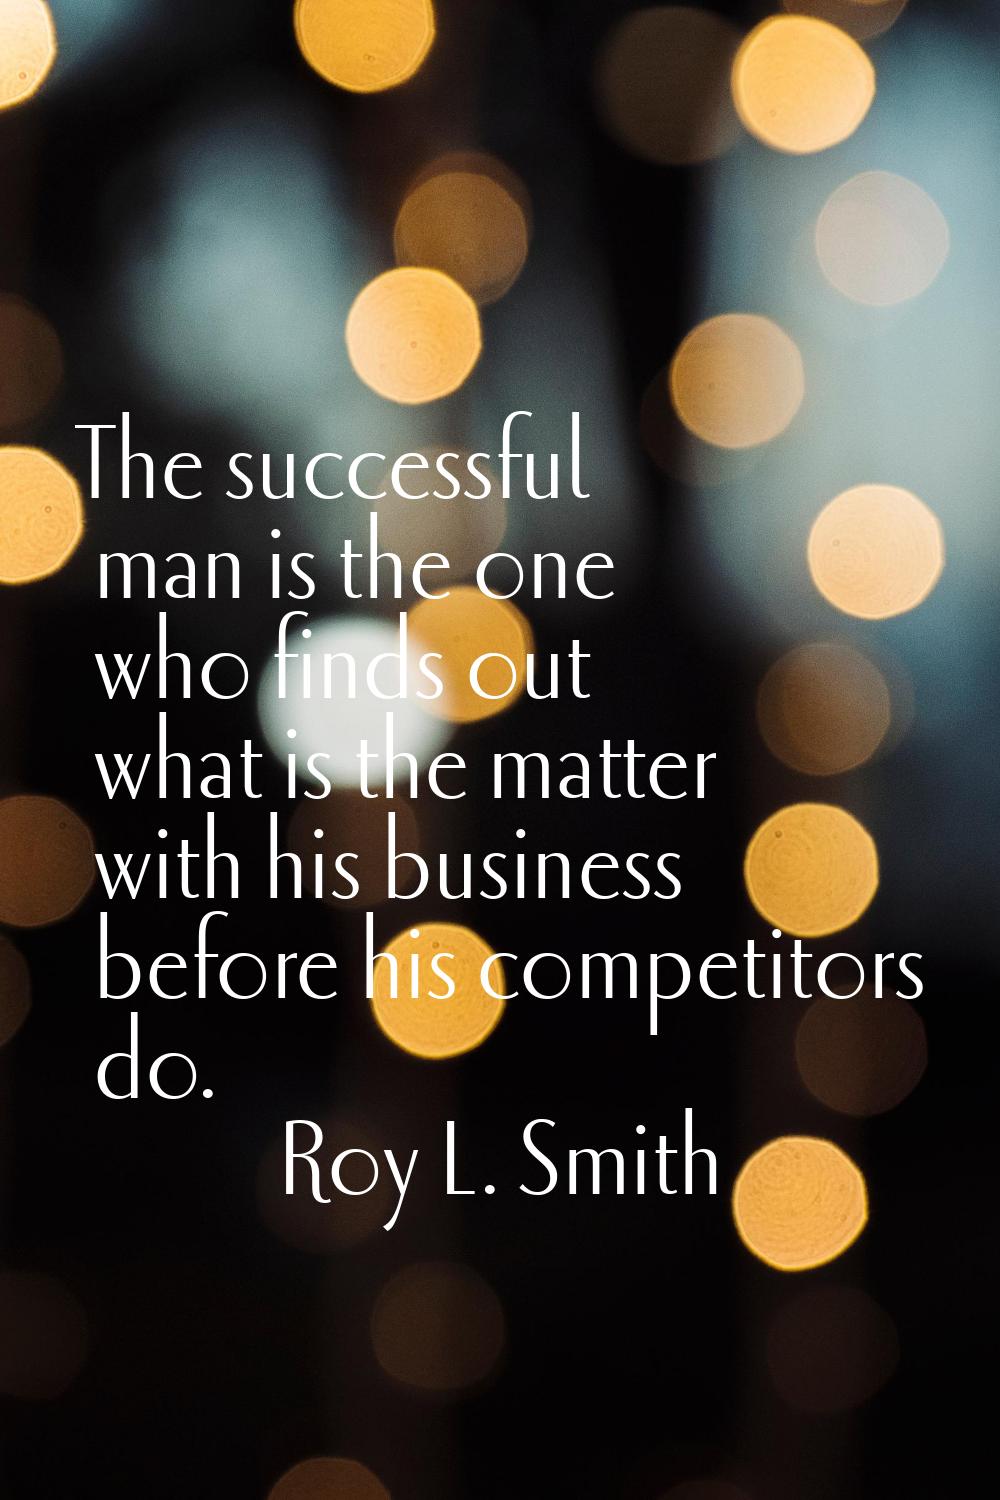 The successful man is the one who finds out what is the matter with his business before his competi